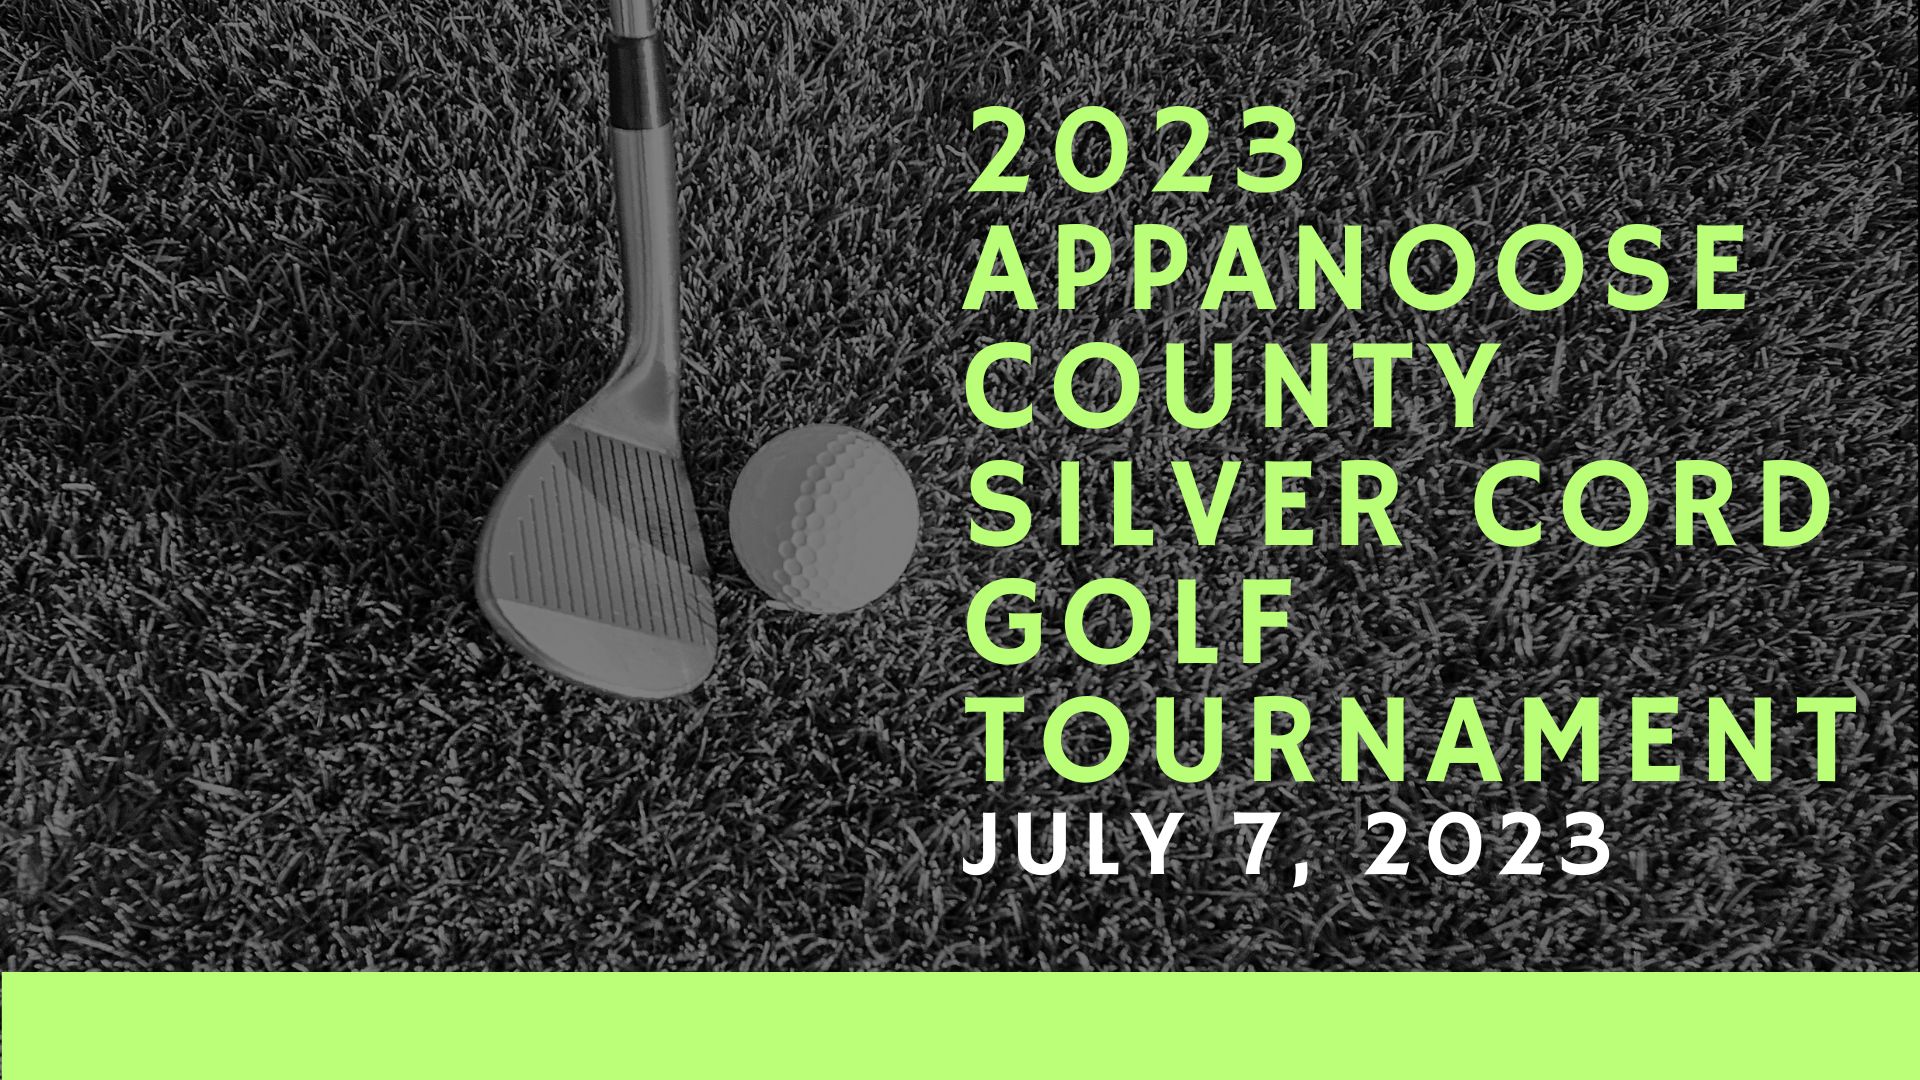 Appanoose County Silver Cord Golf Tournament July 7, 2023